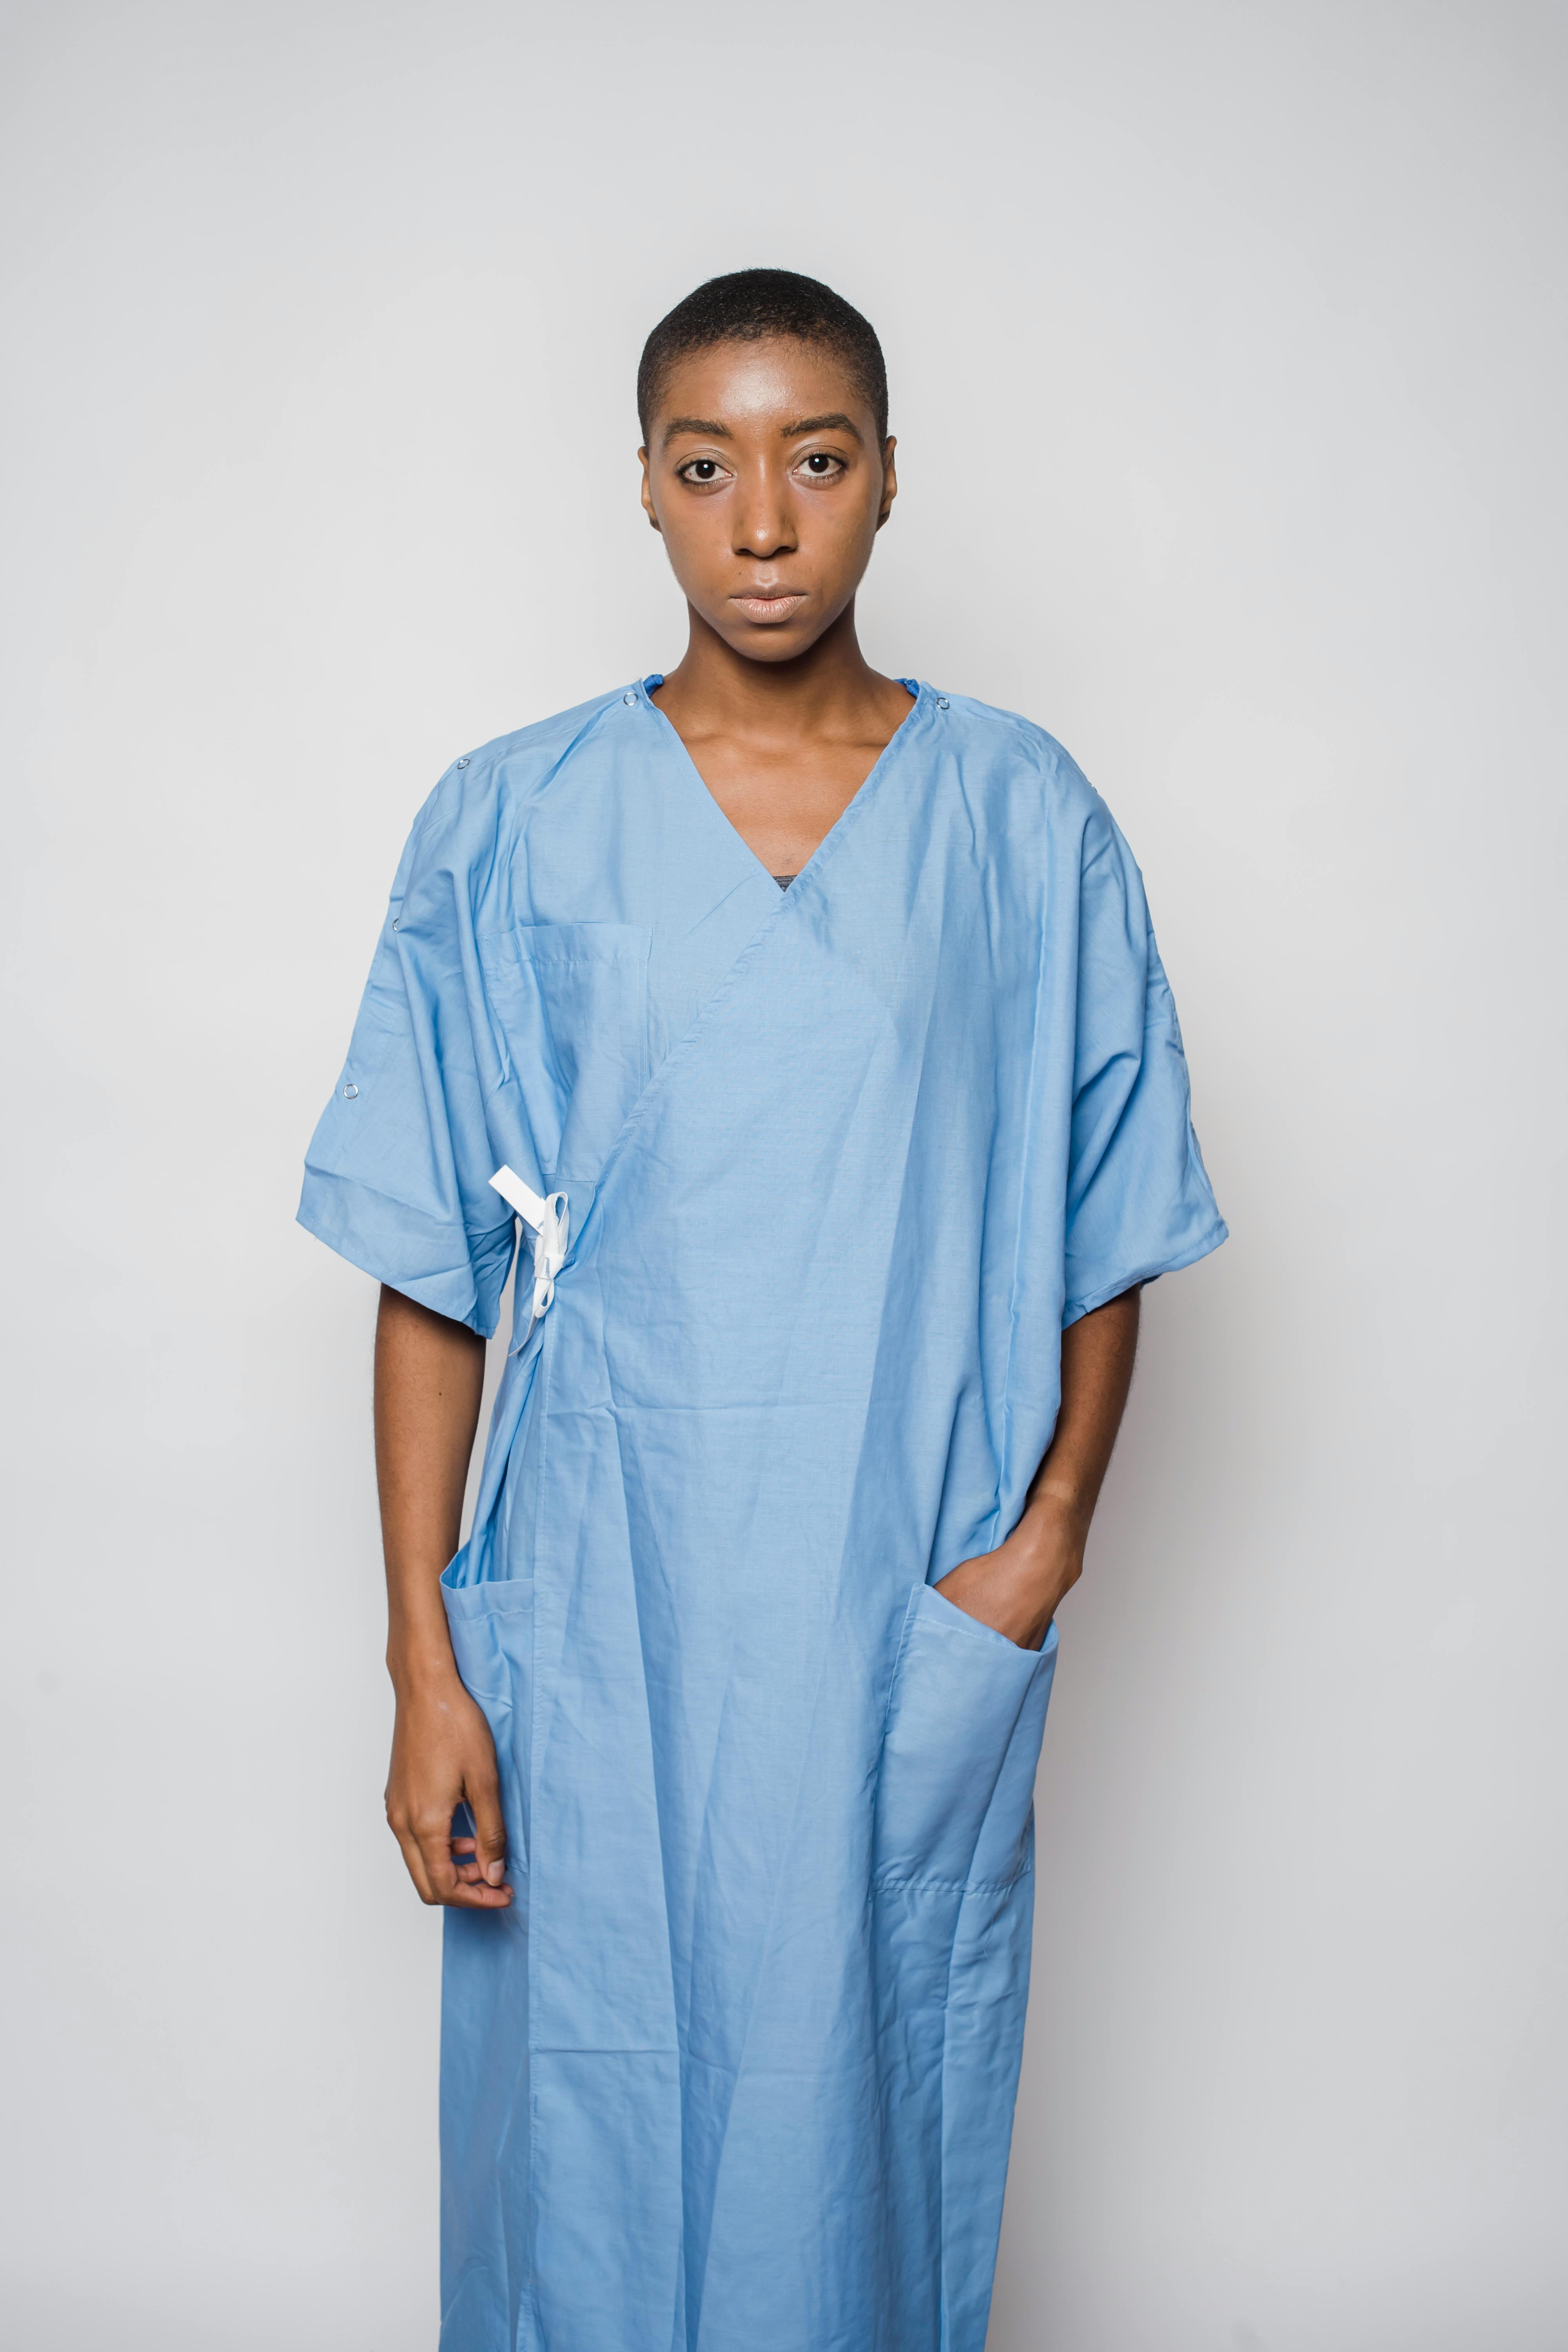 androgynous african american female in medical robe